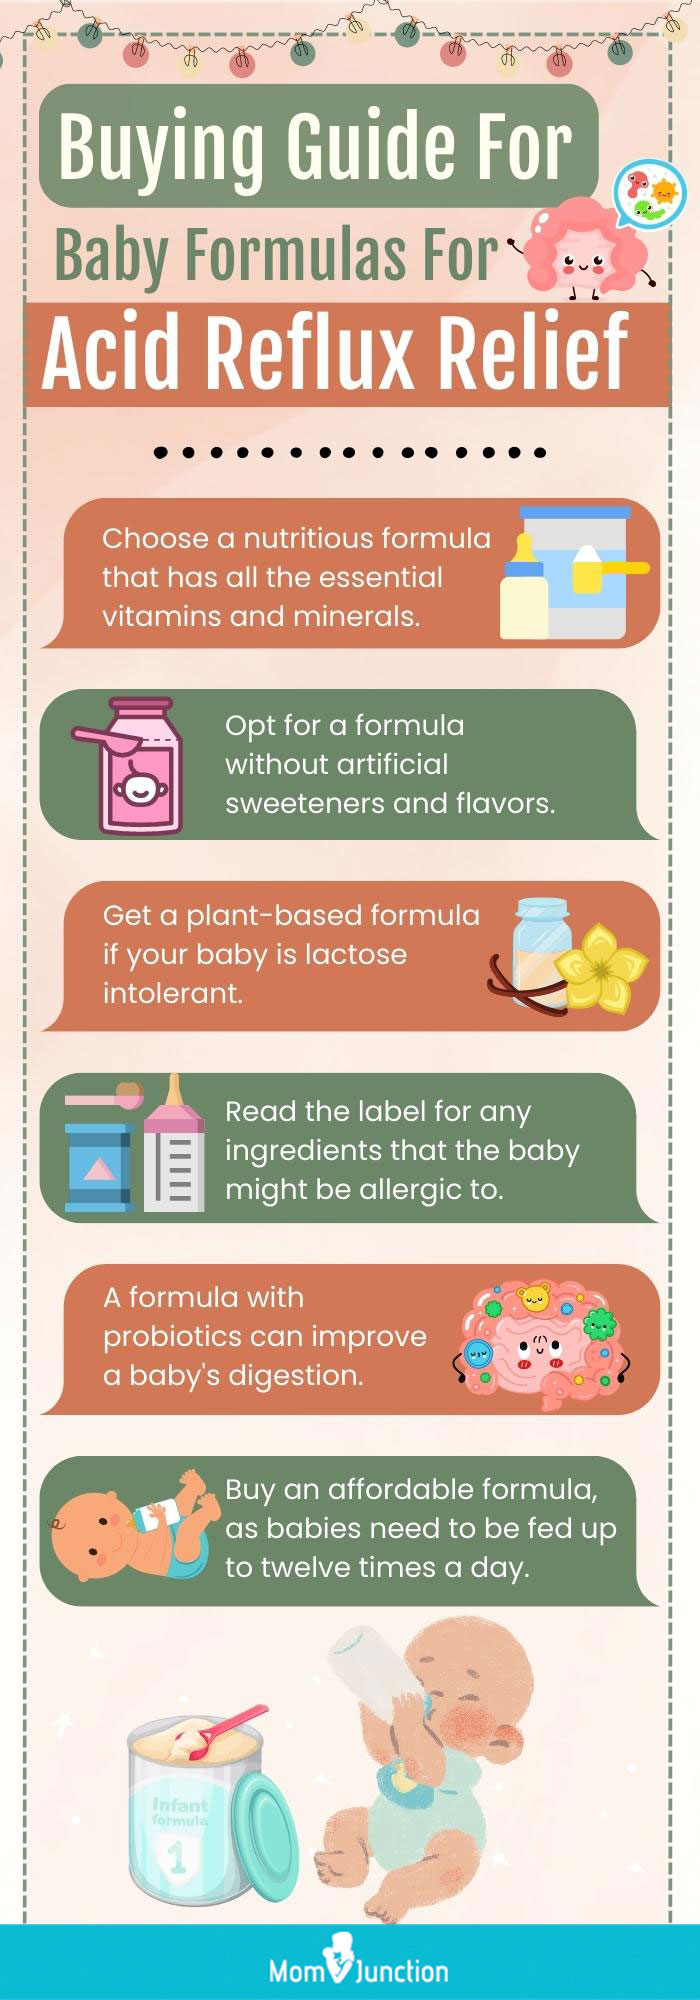 Buying Guide For Baby Formulas For Acid Reflux Relief